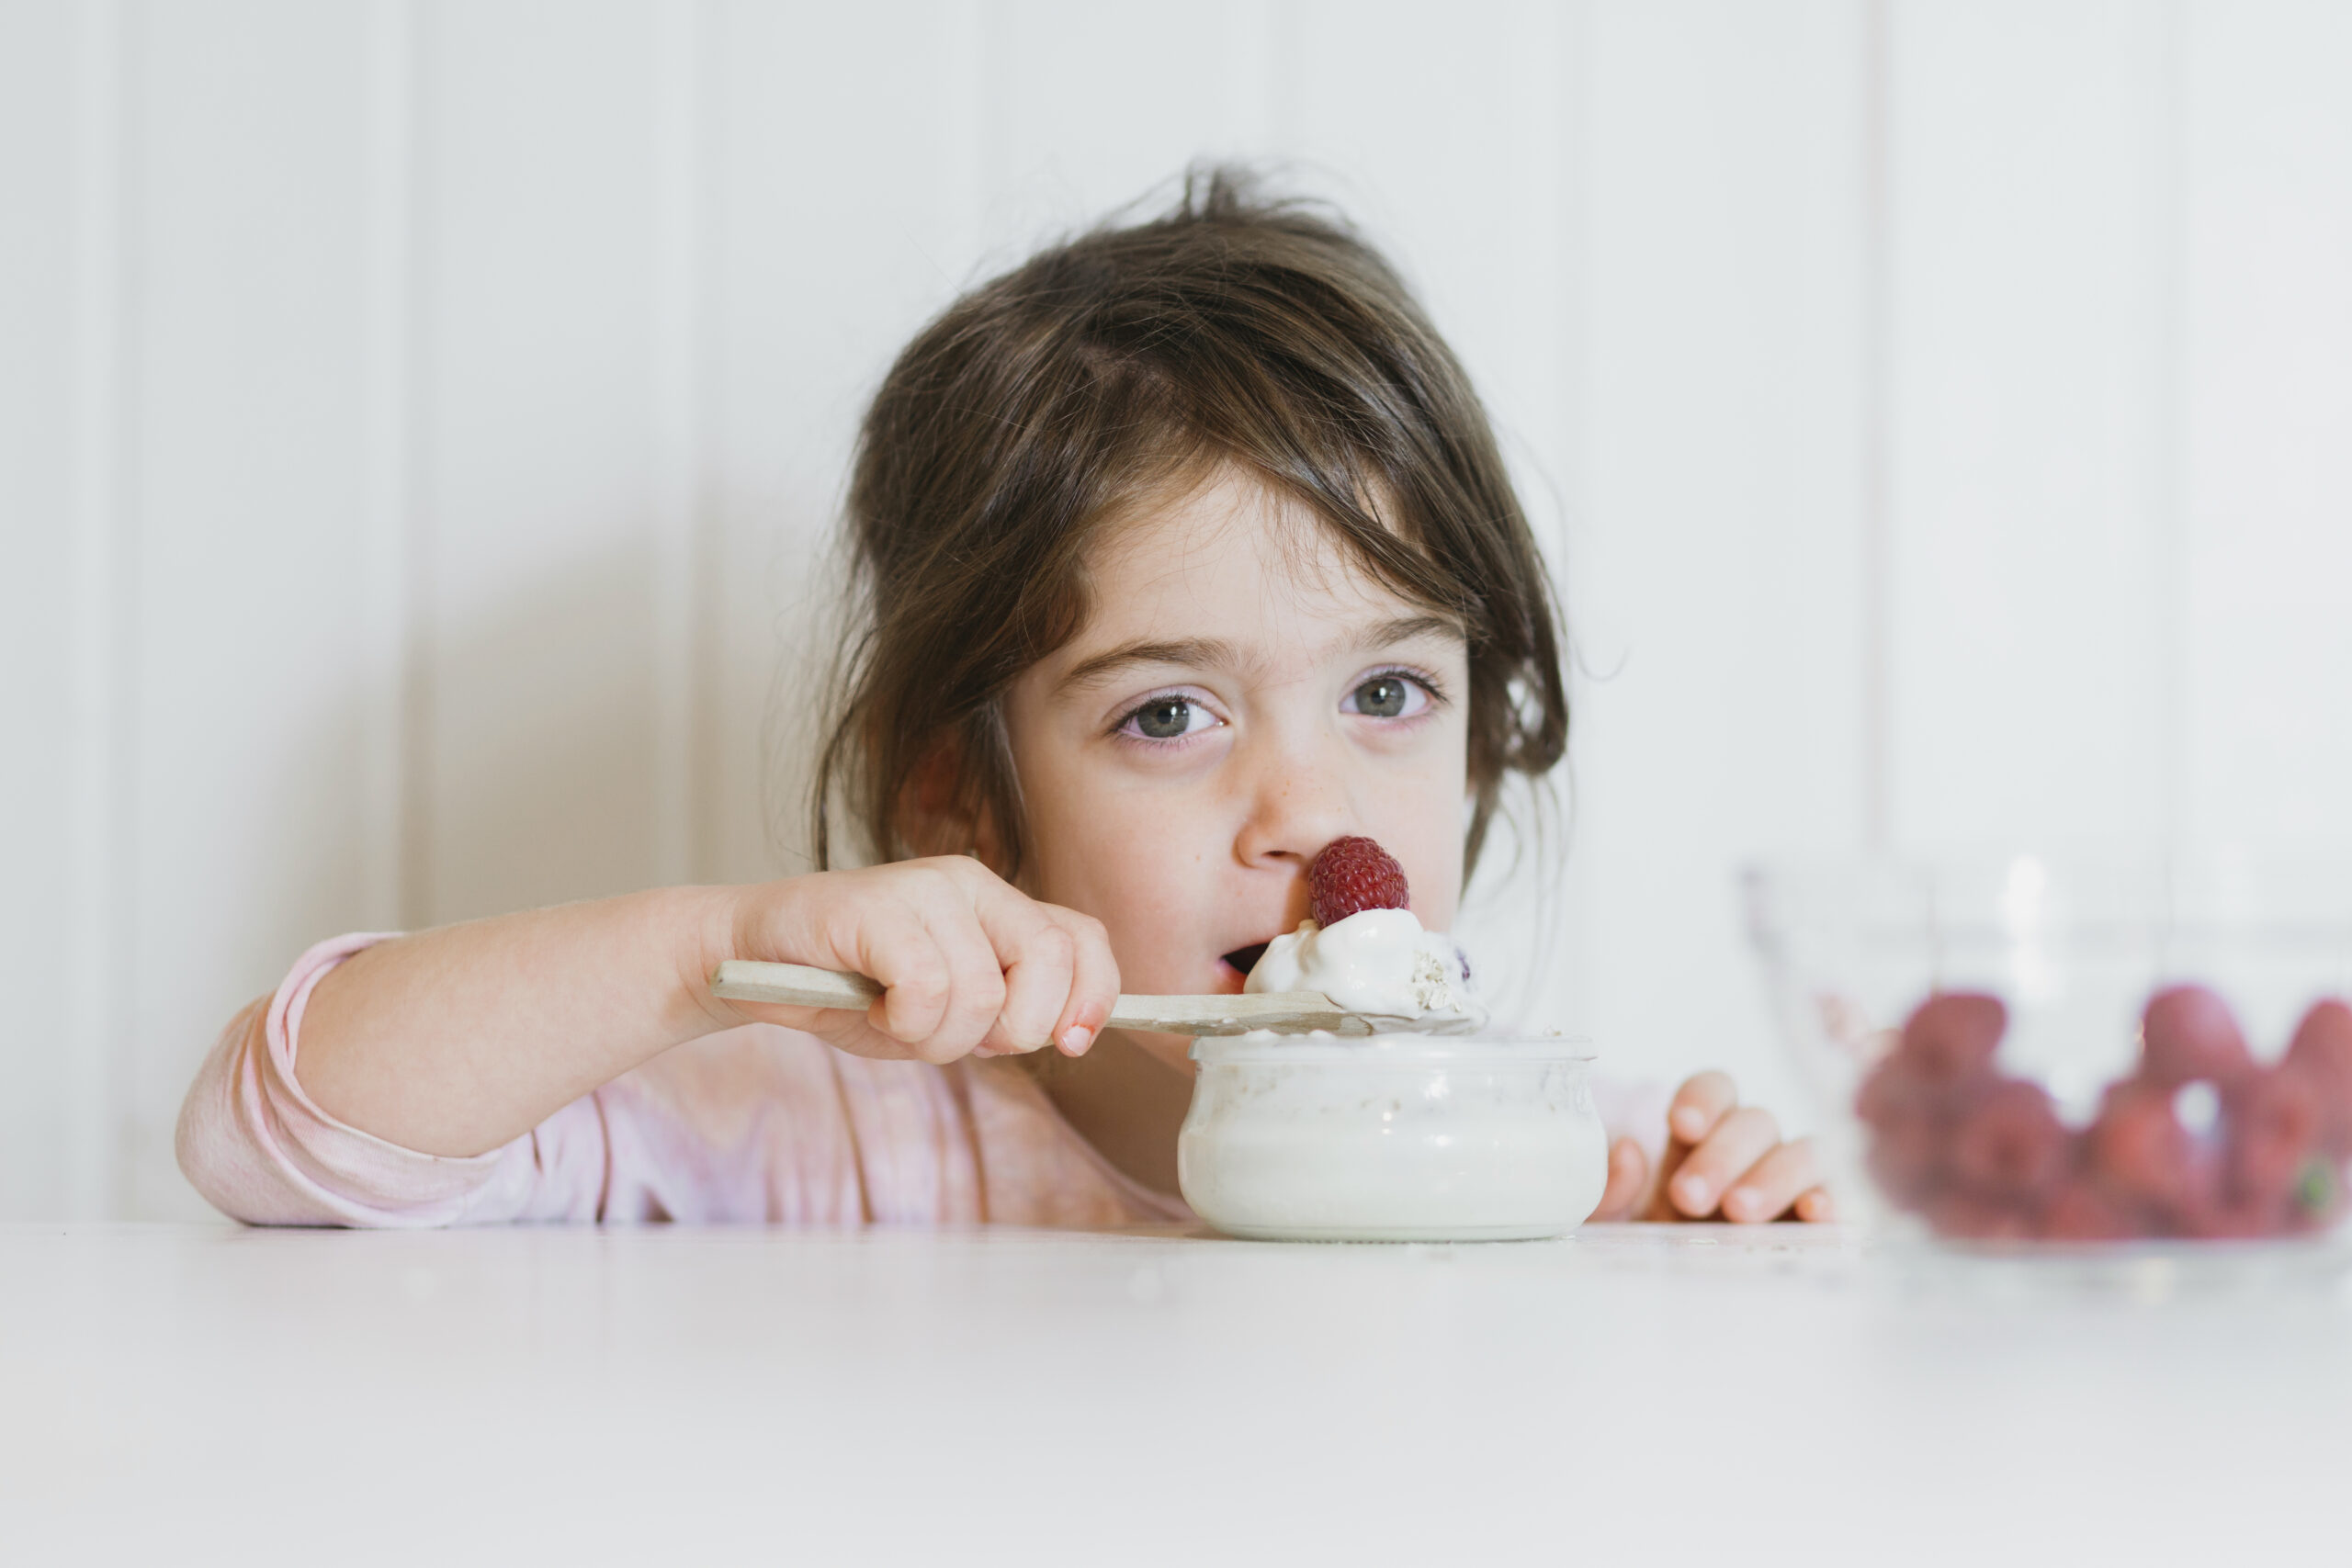 Sugar-Free Desserts For Kids To Snack On